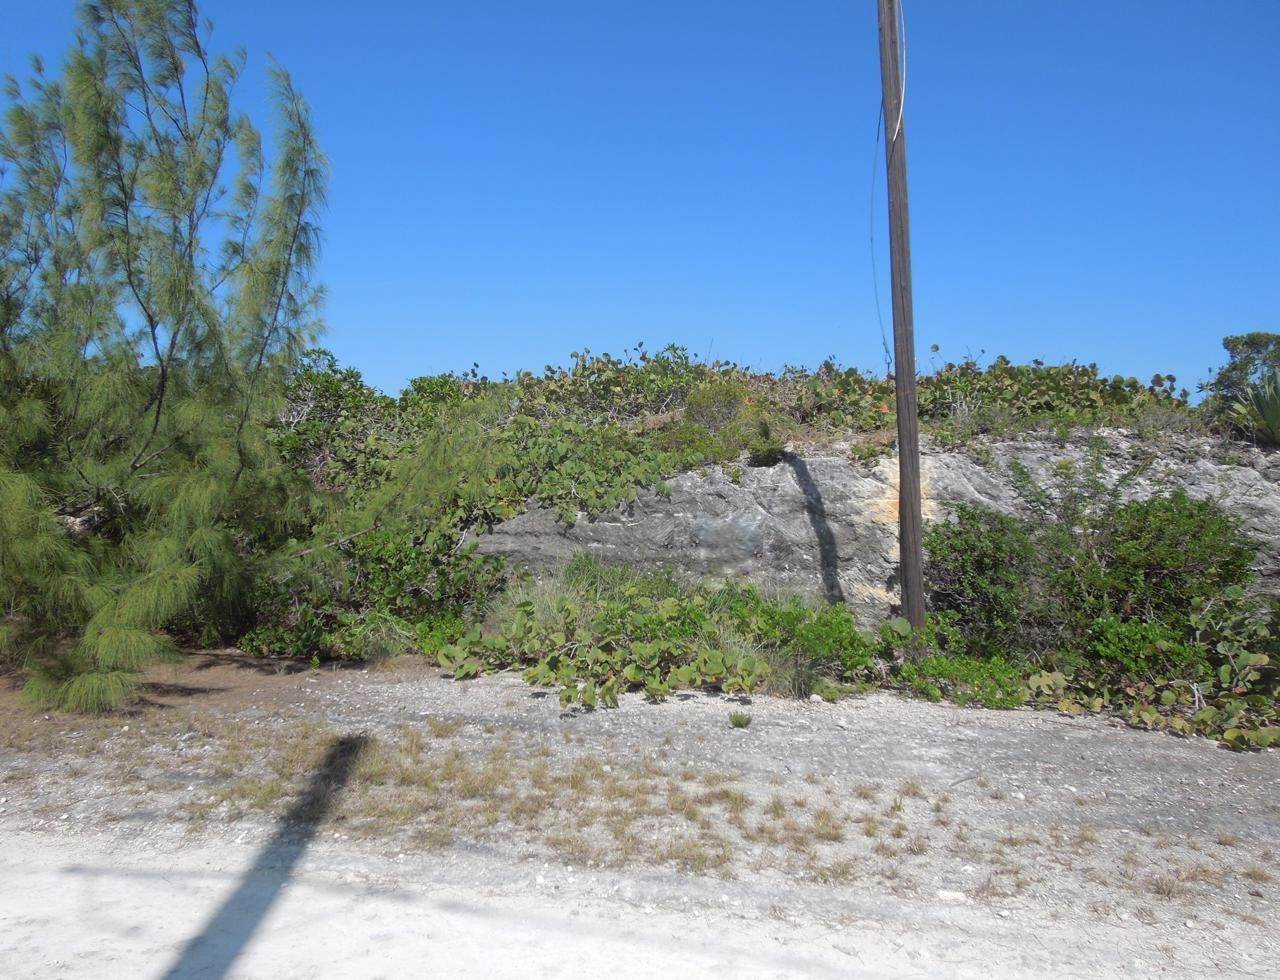 7. Lots / Acreage for Sale at Whale Point, Eleuthera, Bahamas